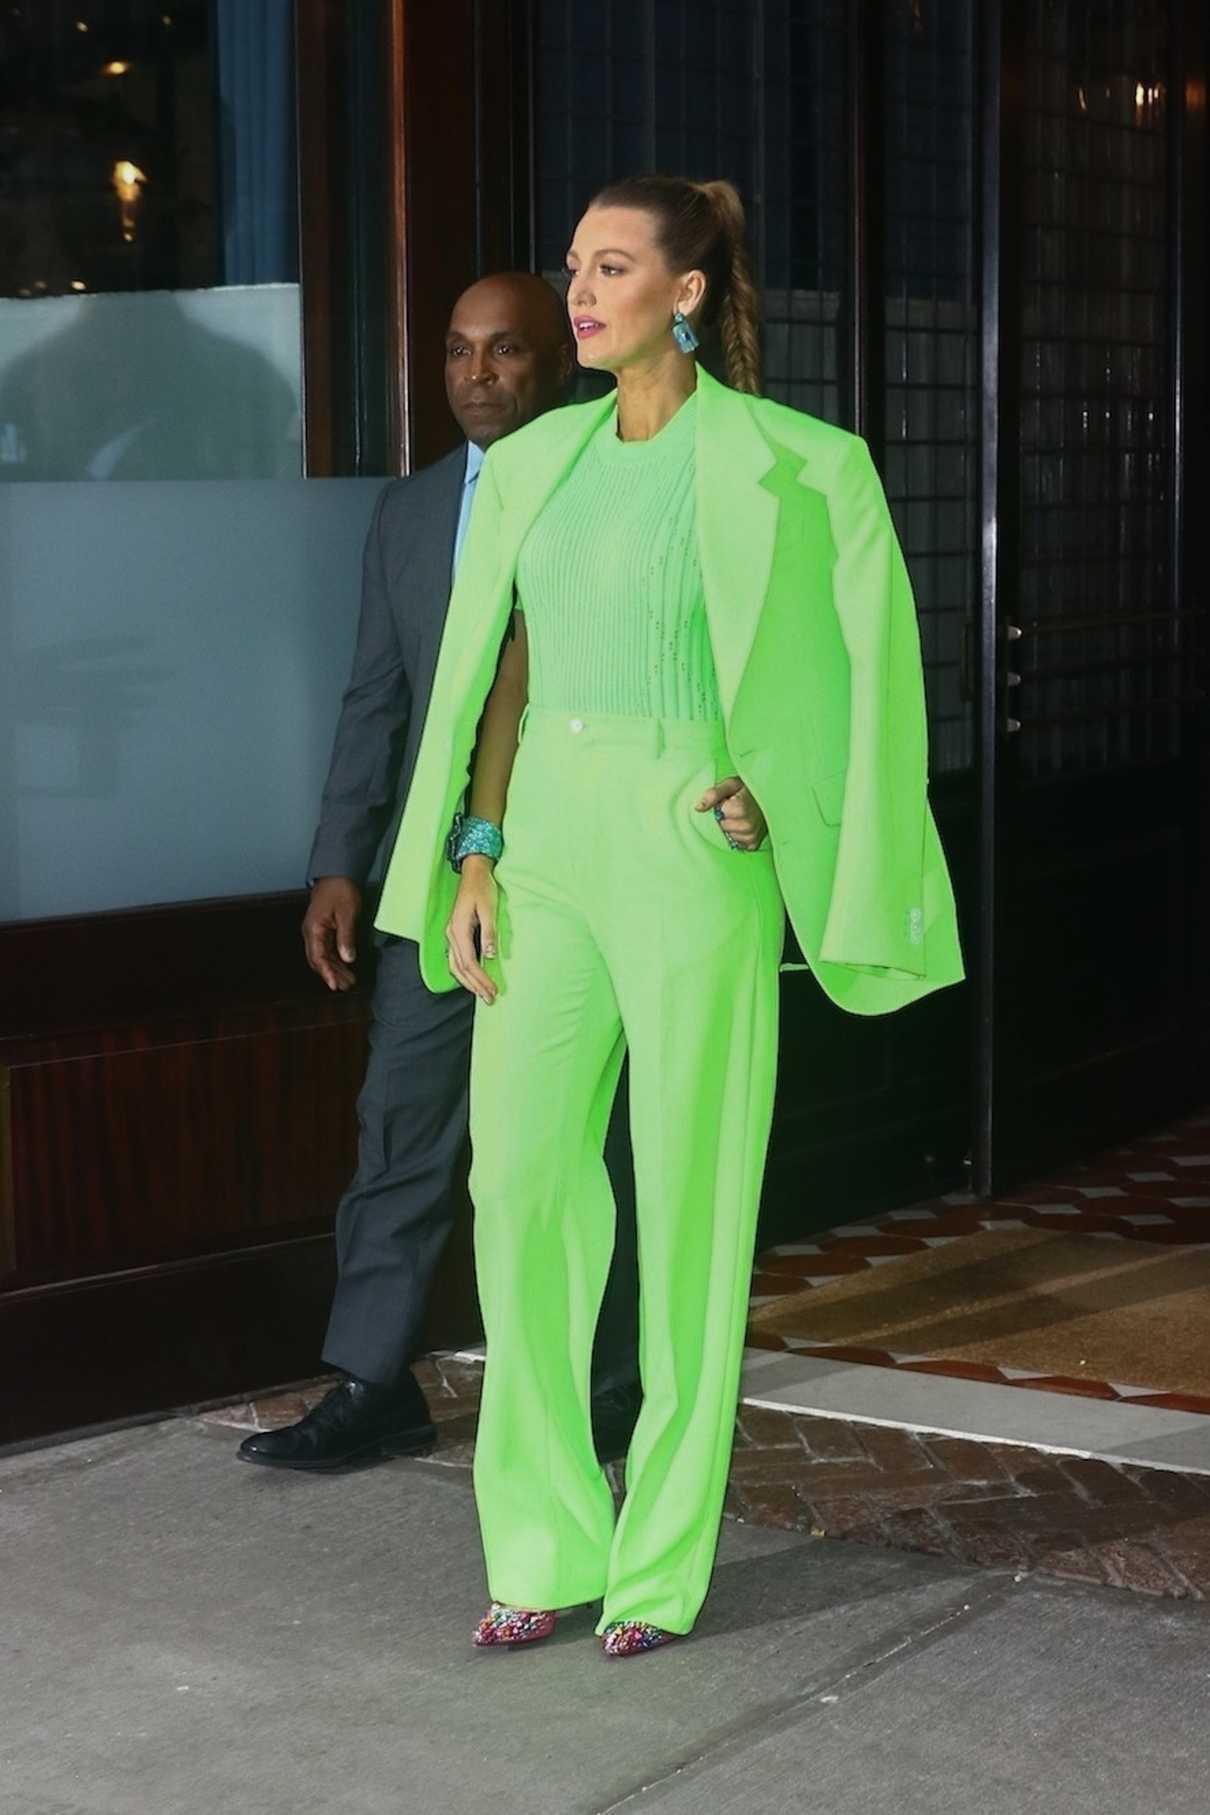 Blake Lively in a Chartreuse Suit Arrives at Spring Studios in New York ...